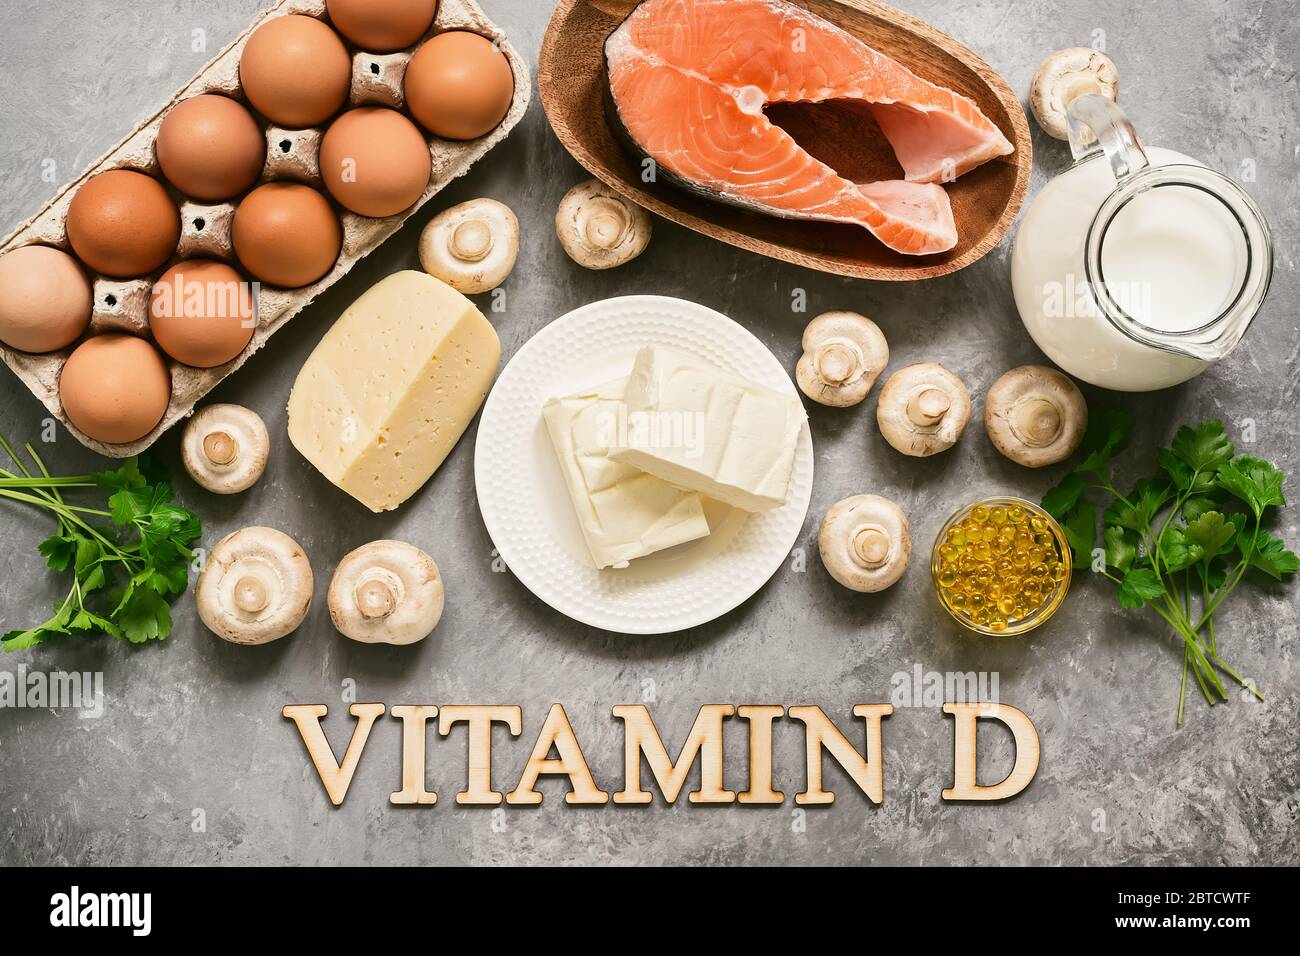 Foods Rich In Vitamin D. Products high in vitamin D. Top view, flat lay, lettering Stock Photo